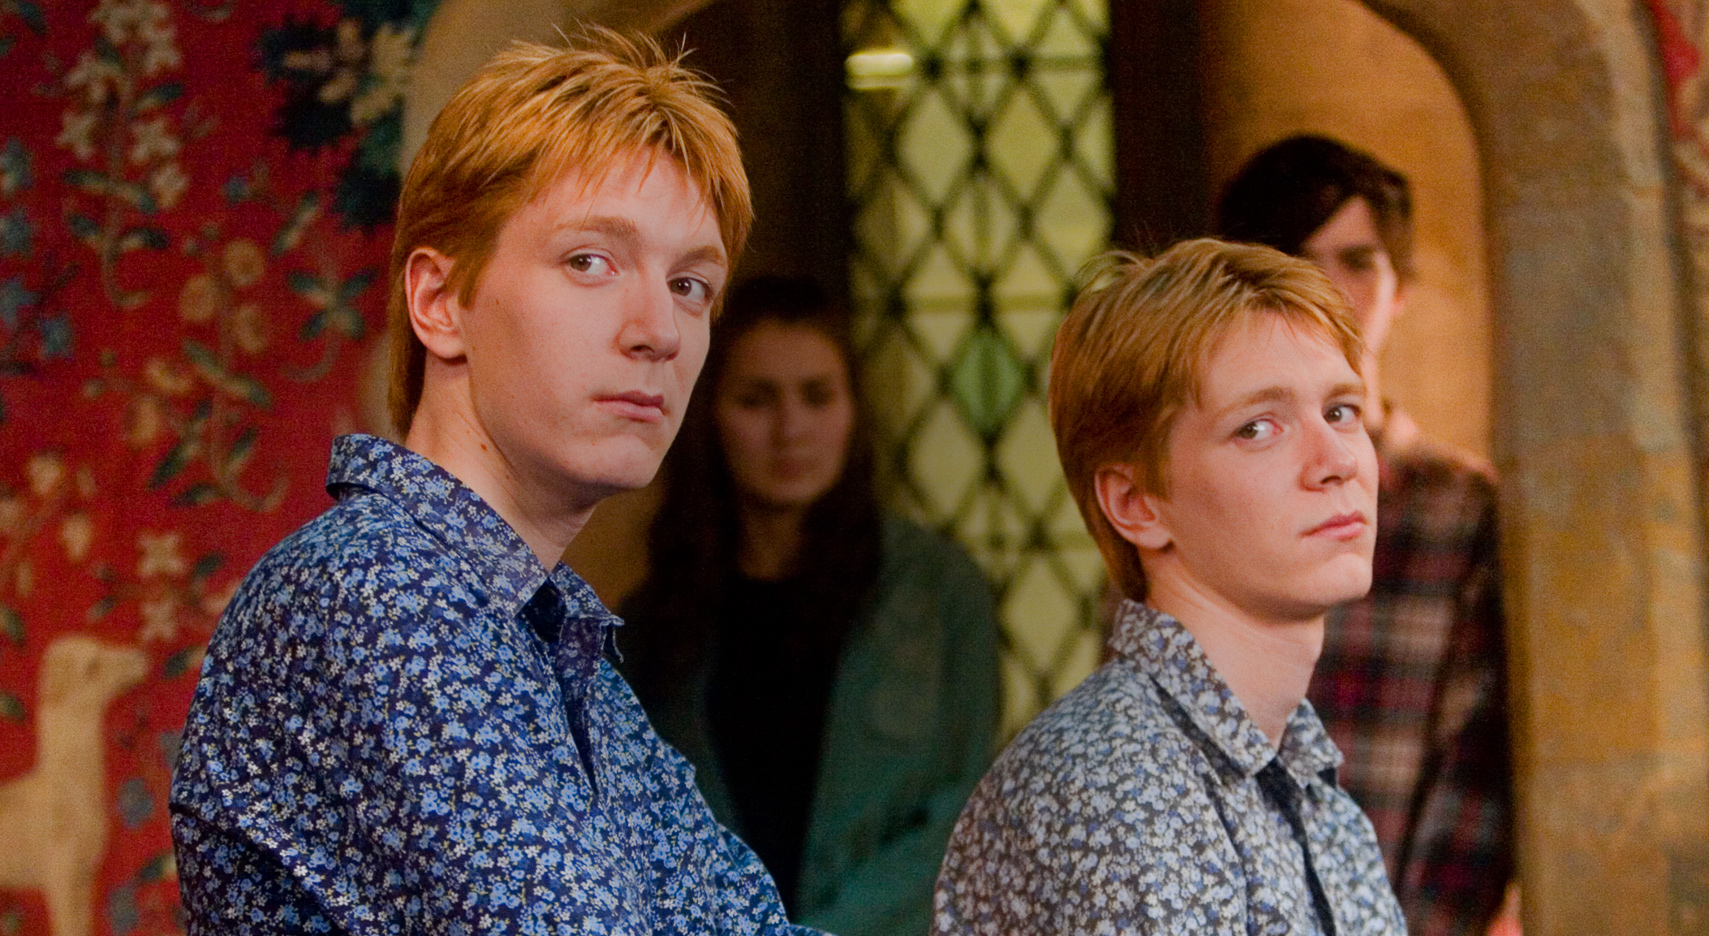 Carousel Fred and George twins feature common room